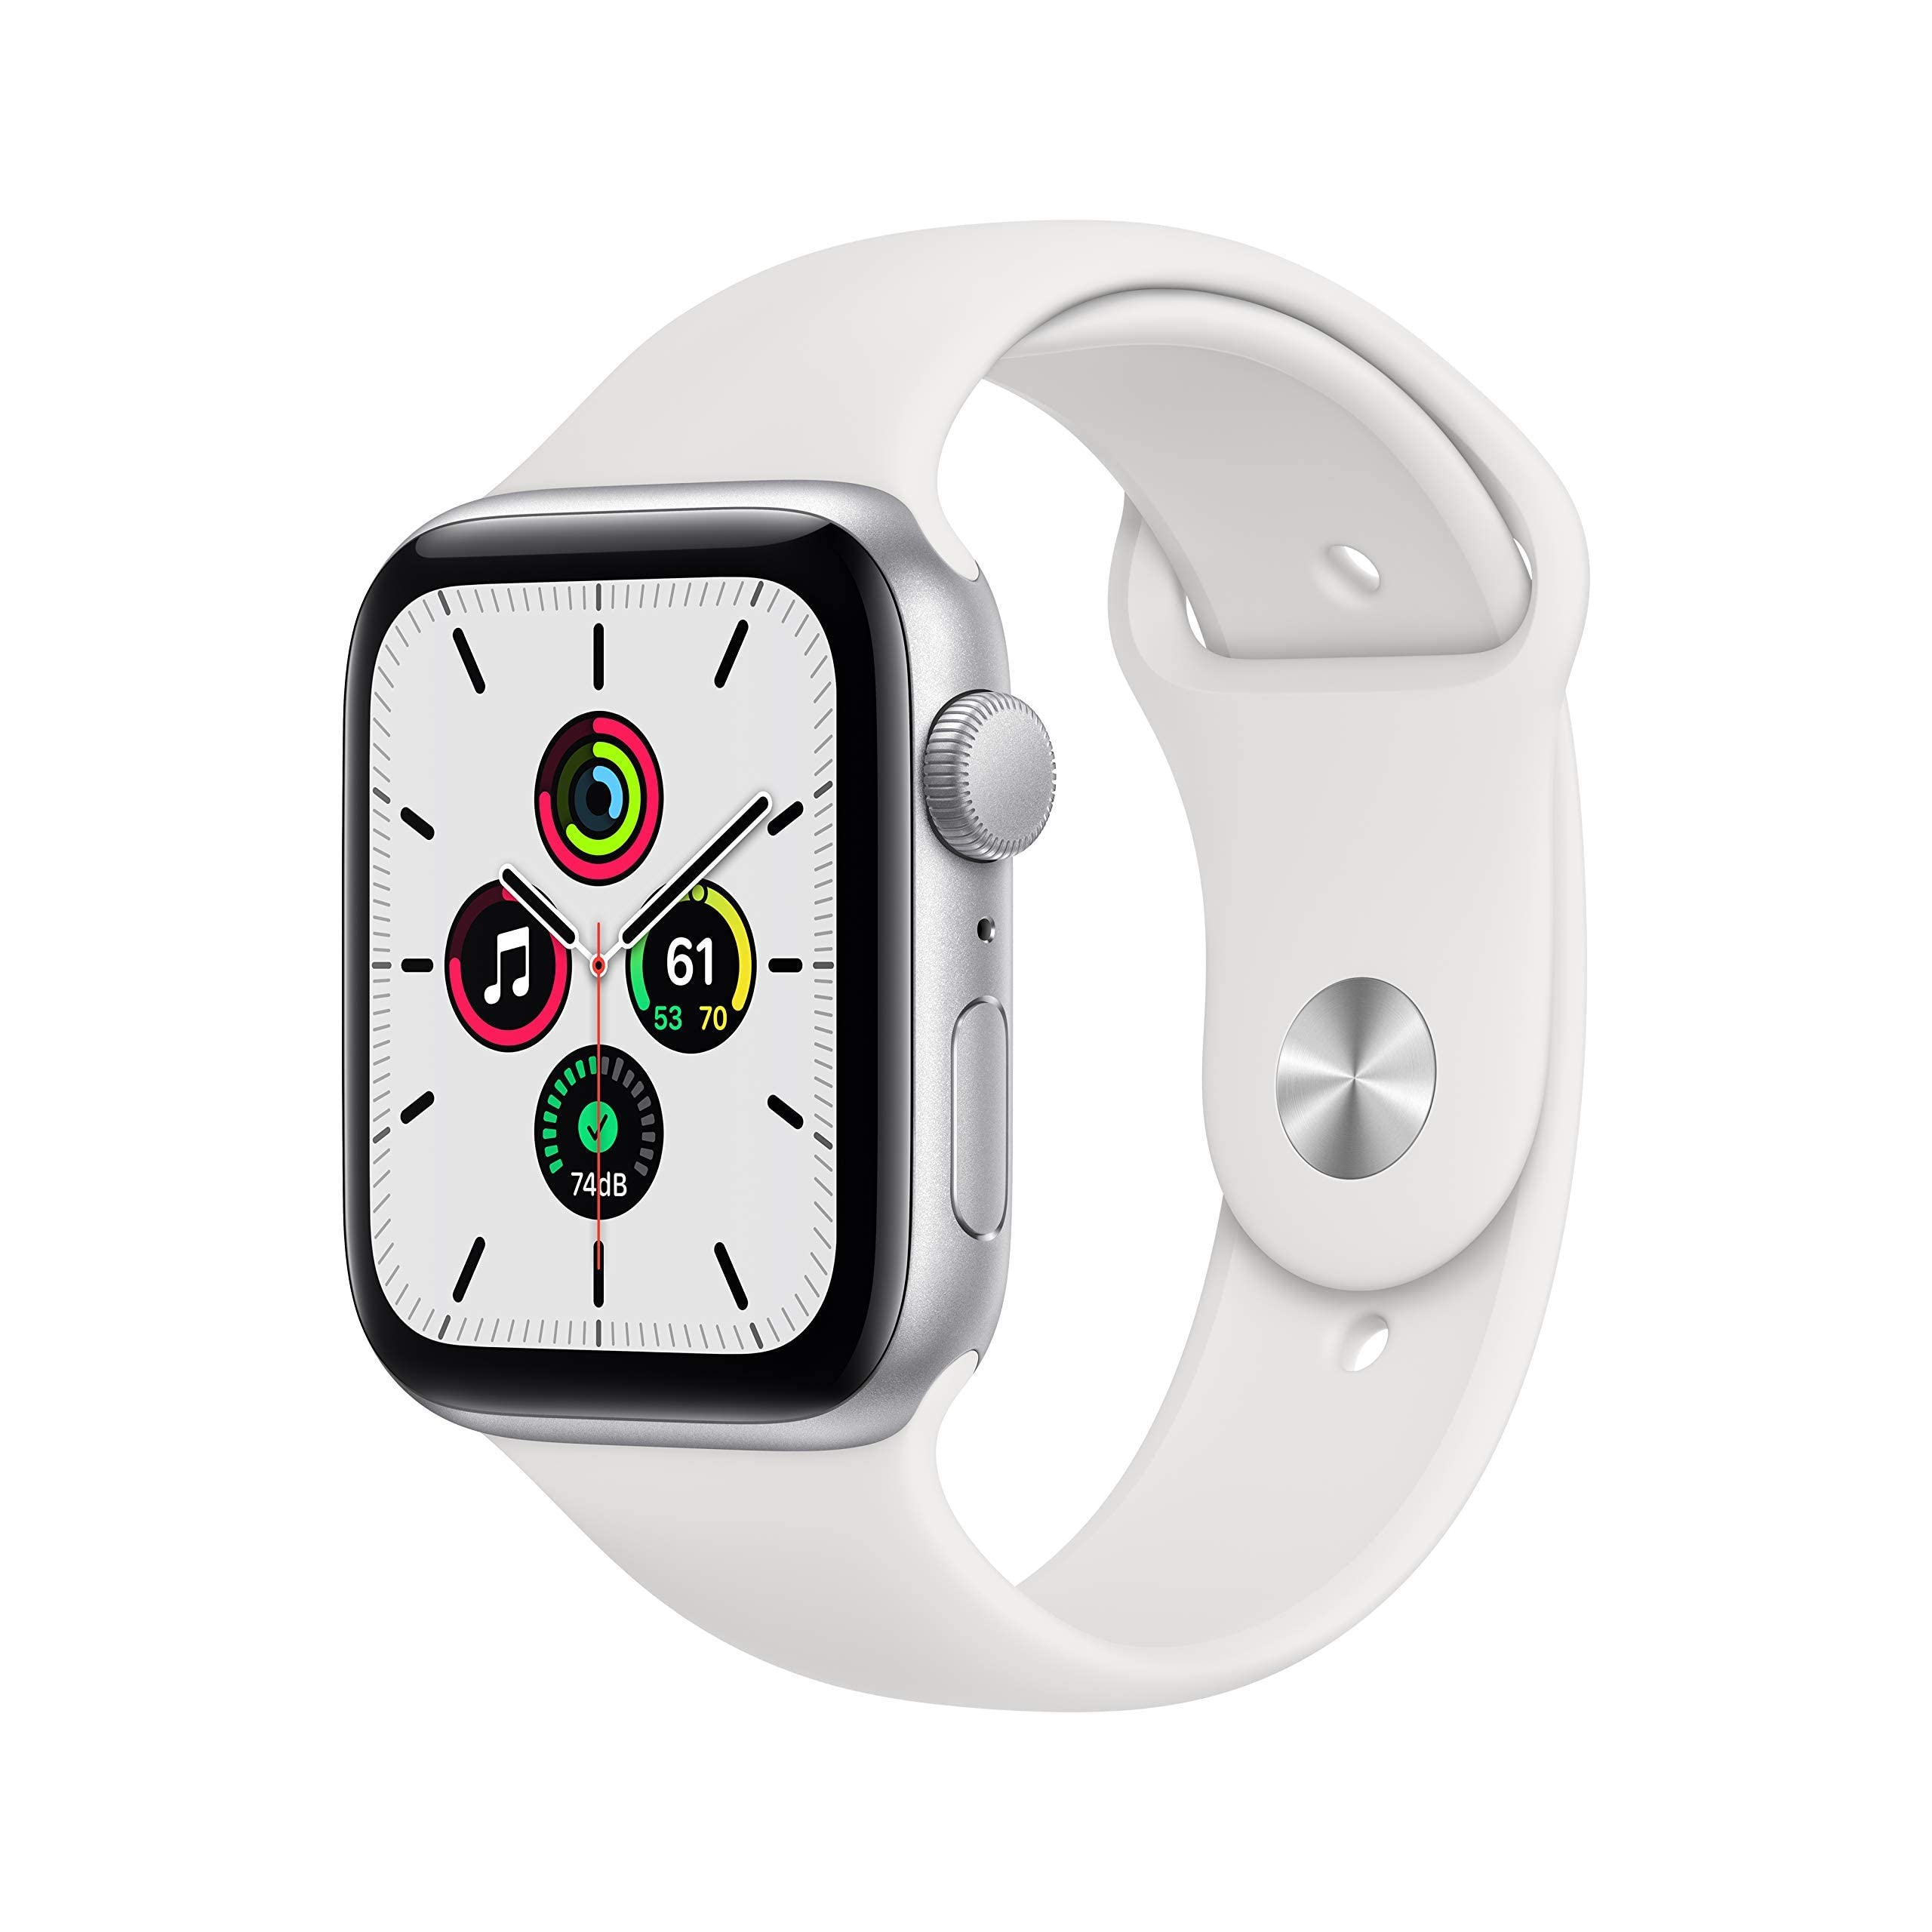 Apple Watch SE (GPS, 44mm) - Silver Aluminum Case with White Sport Band (Renewed)